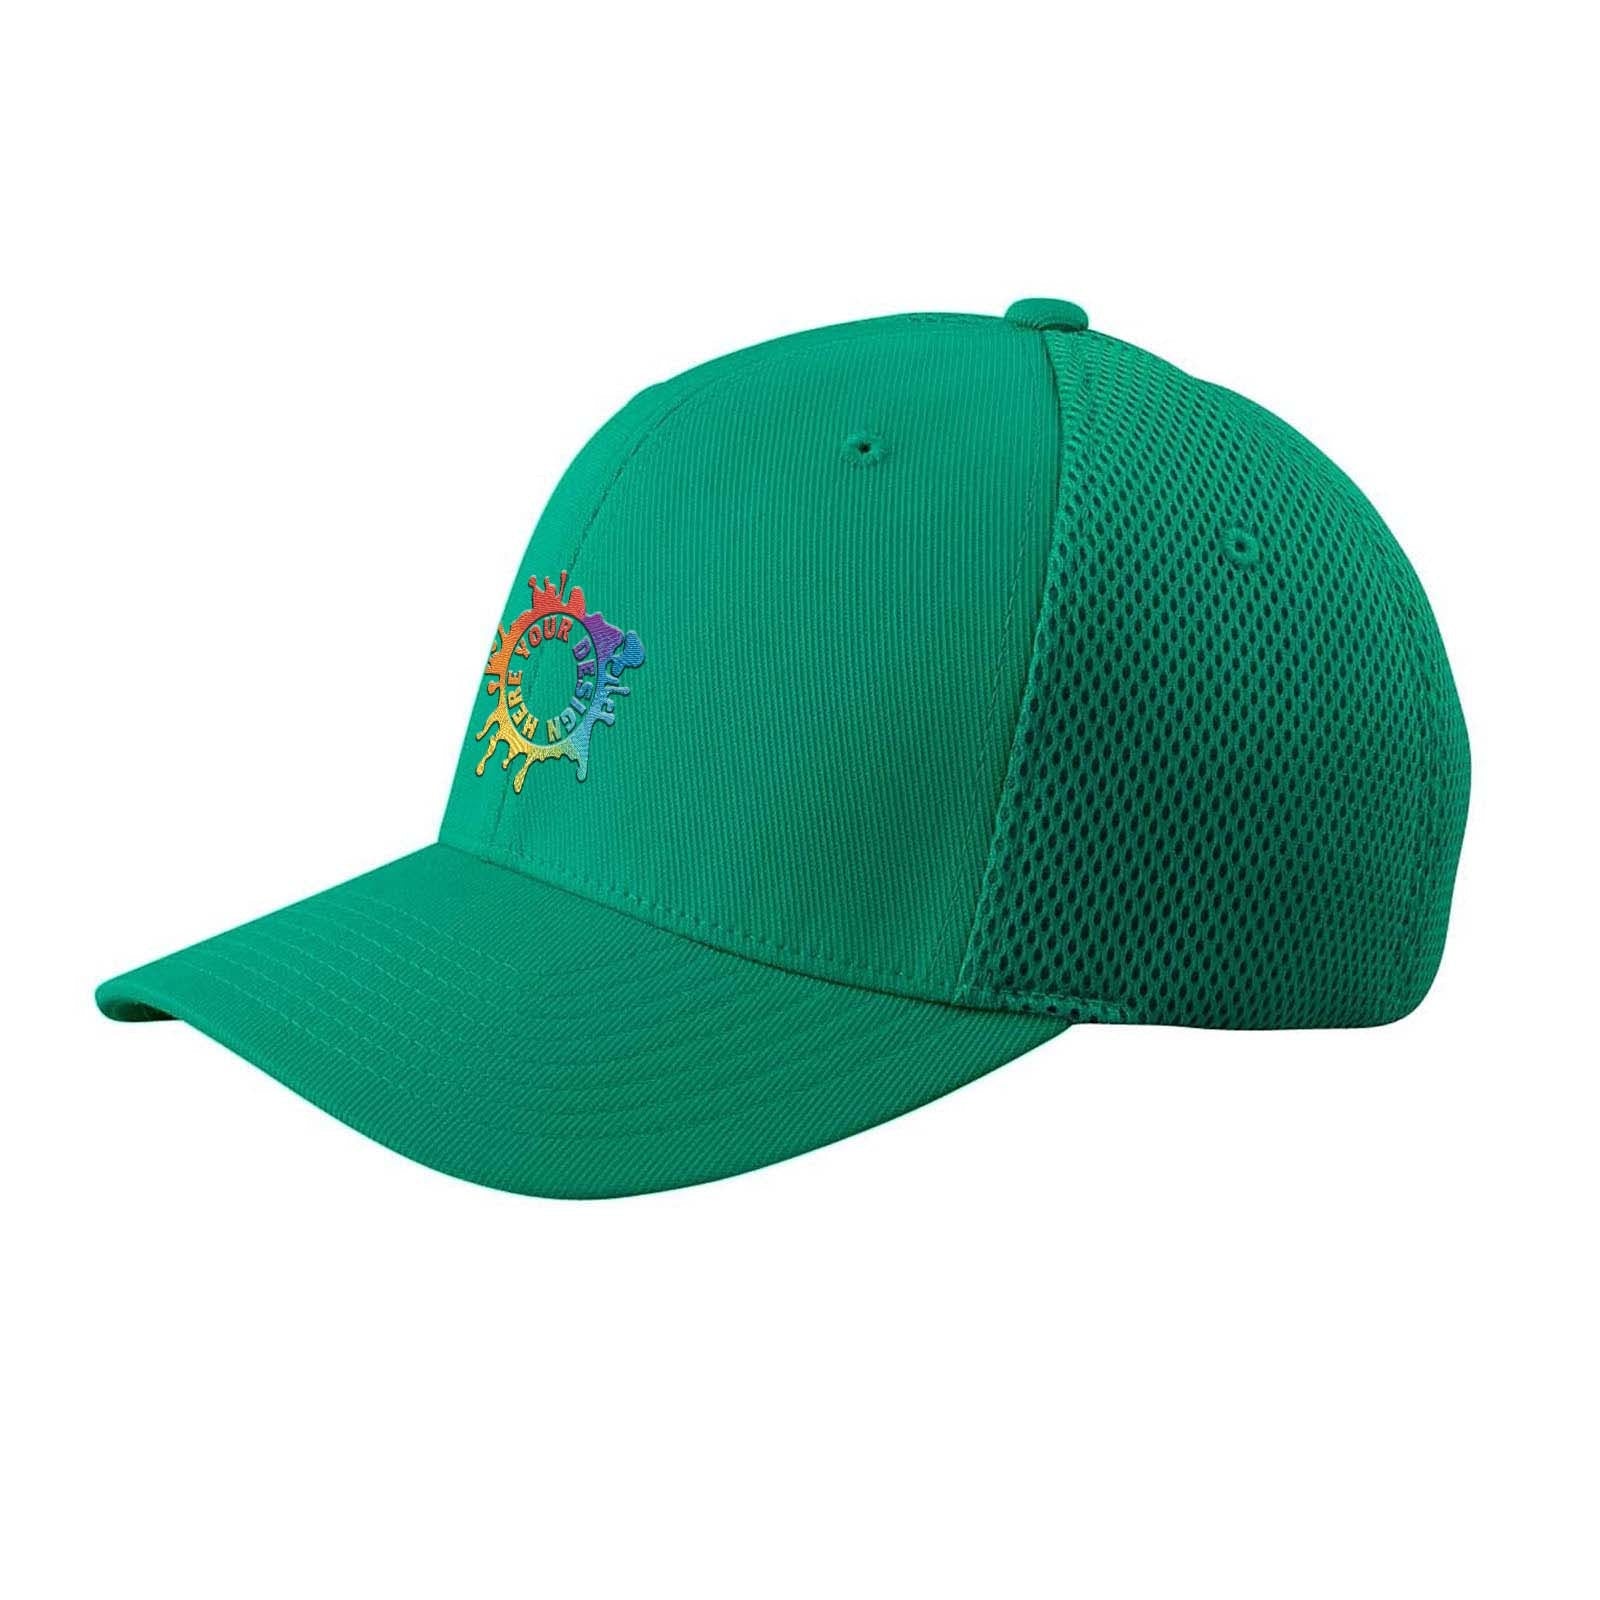 Embroidered Flexfit Adult Ultrafibre and Airmesh Cap - Mato & Hash